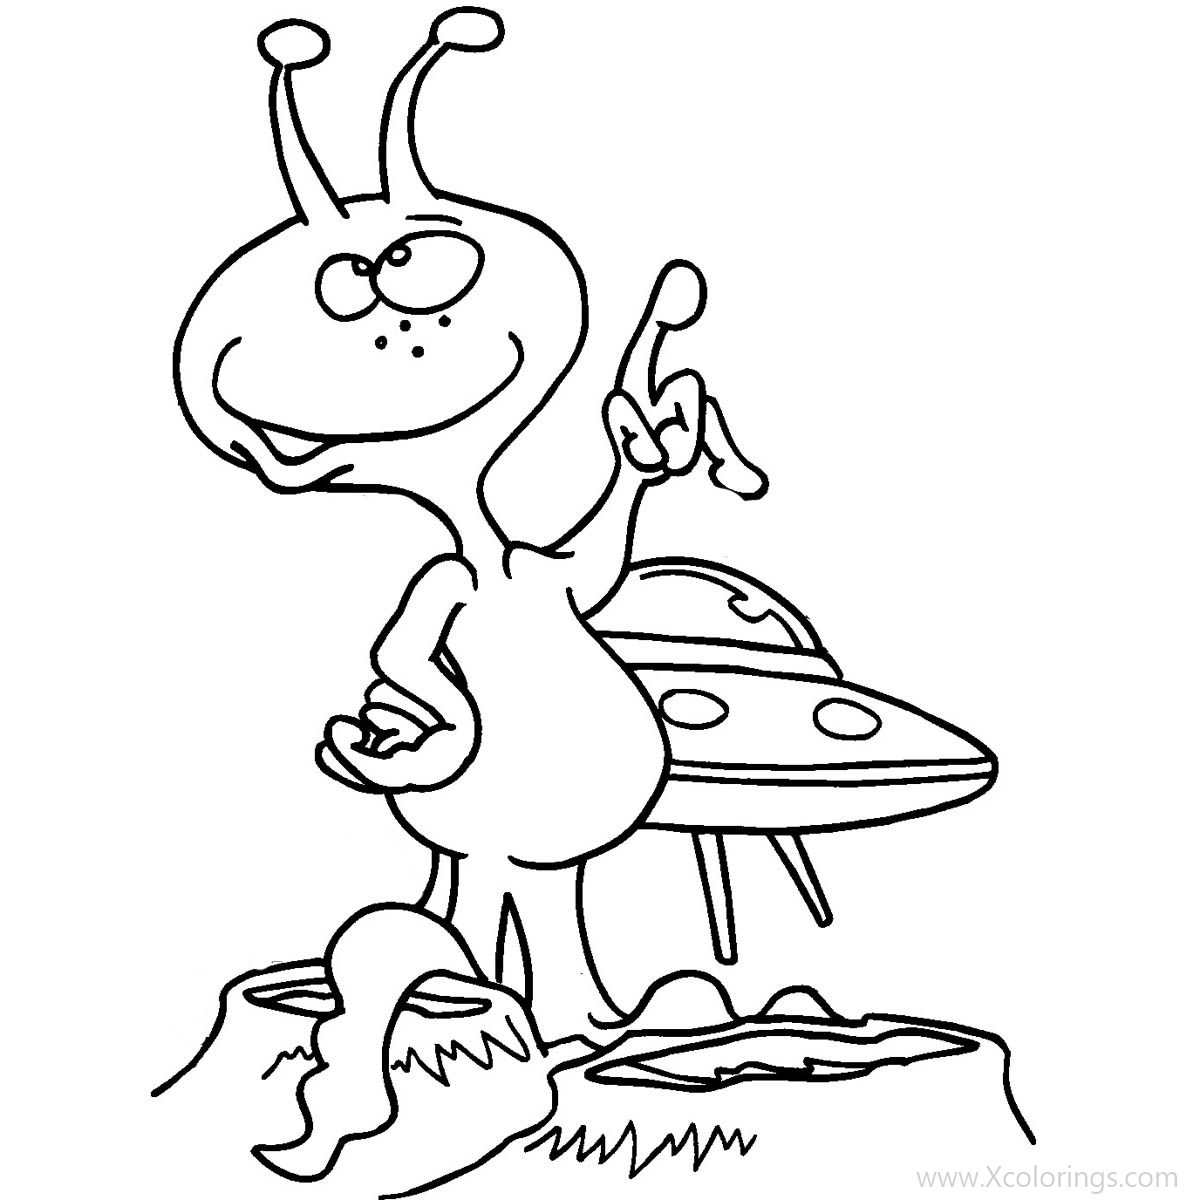 Free Alien and Volcanoes Coloring Pages printable